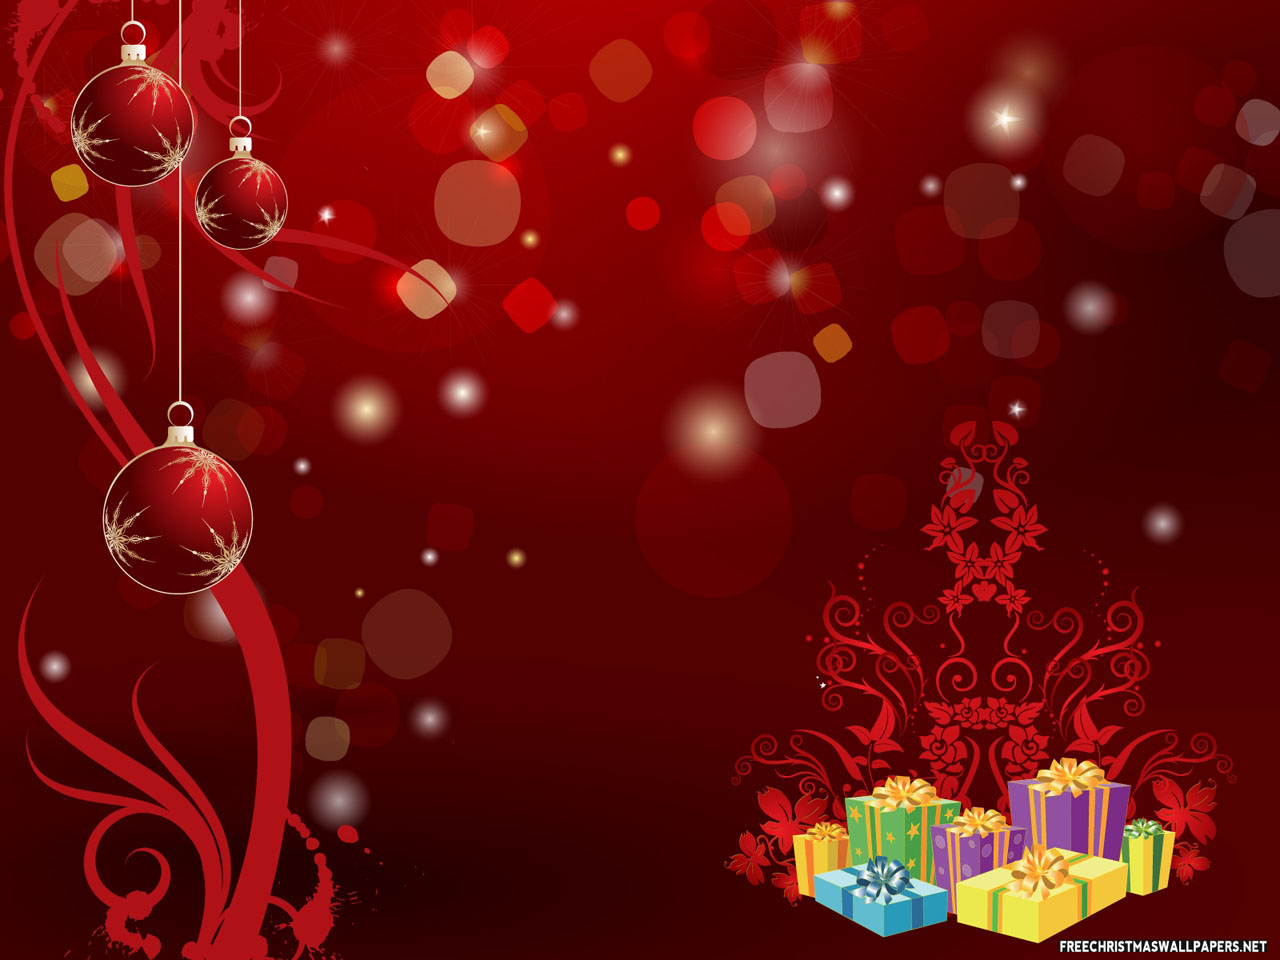 best christmas wallpaper,red,text,graphic design,pattern,design